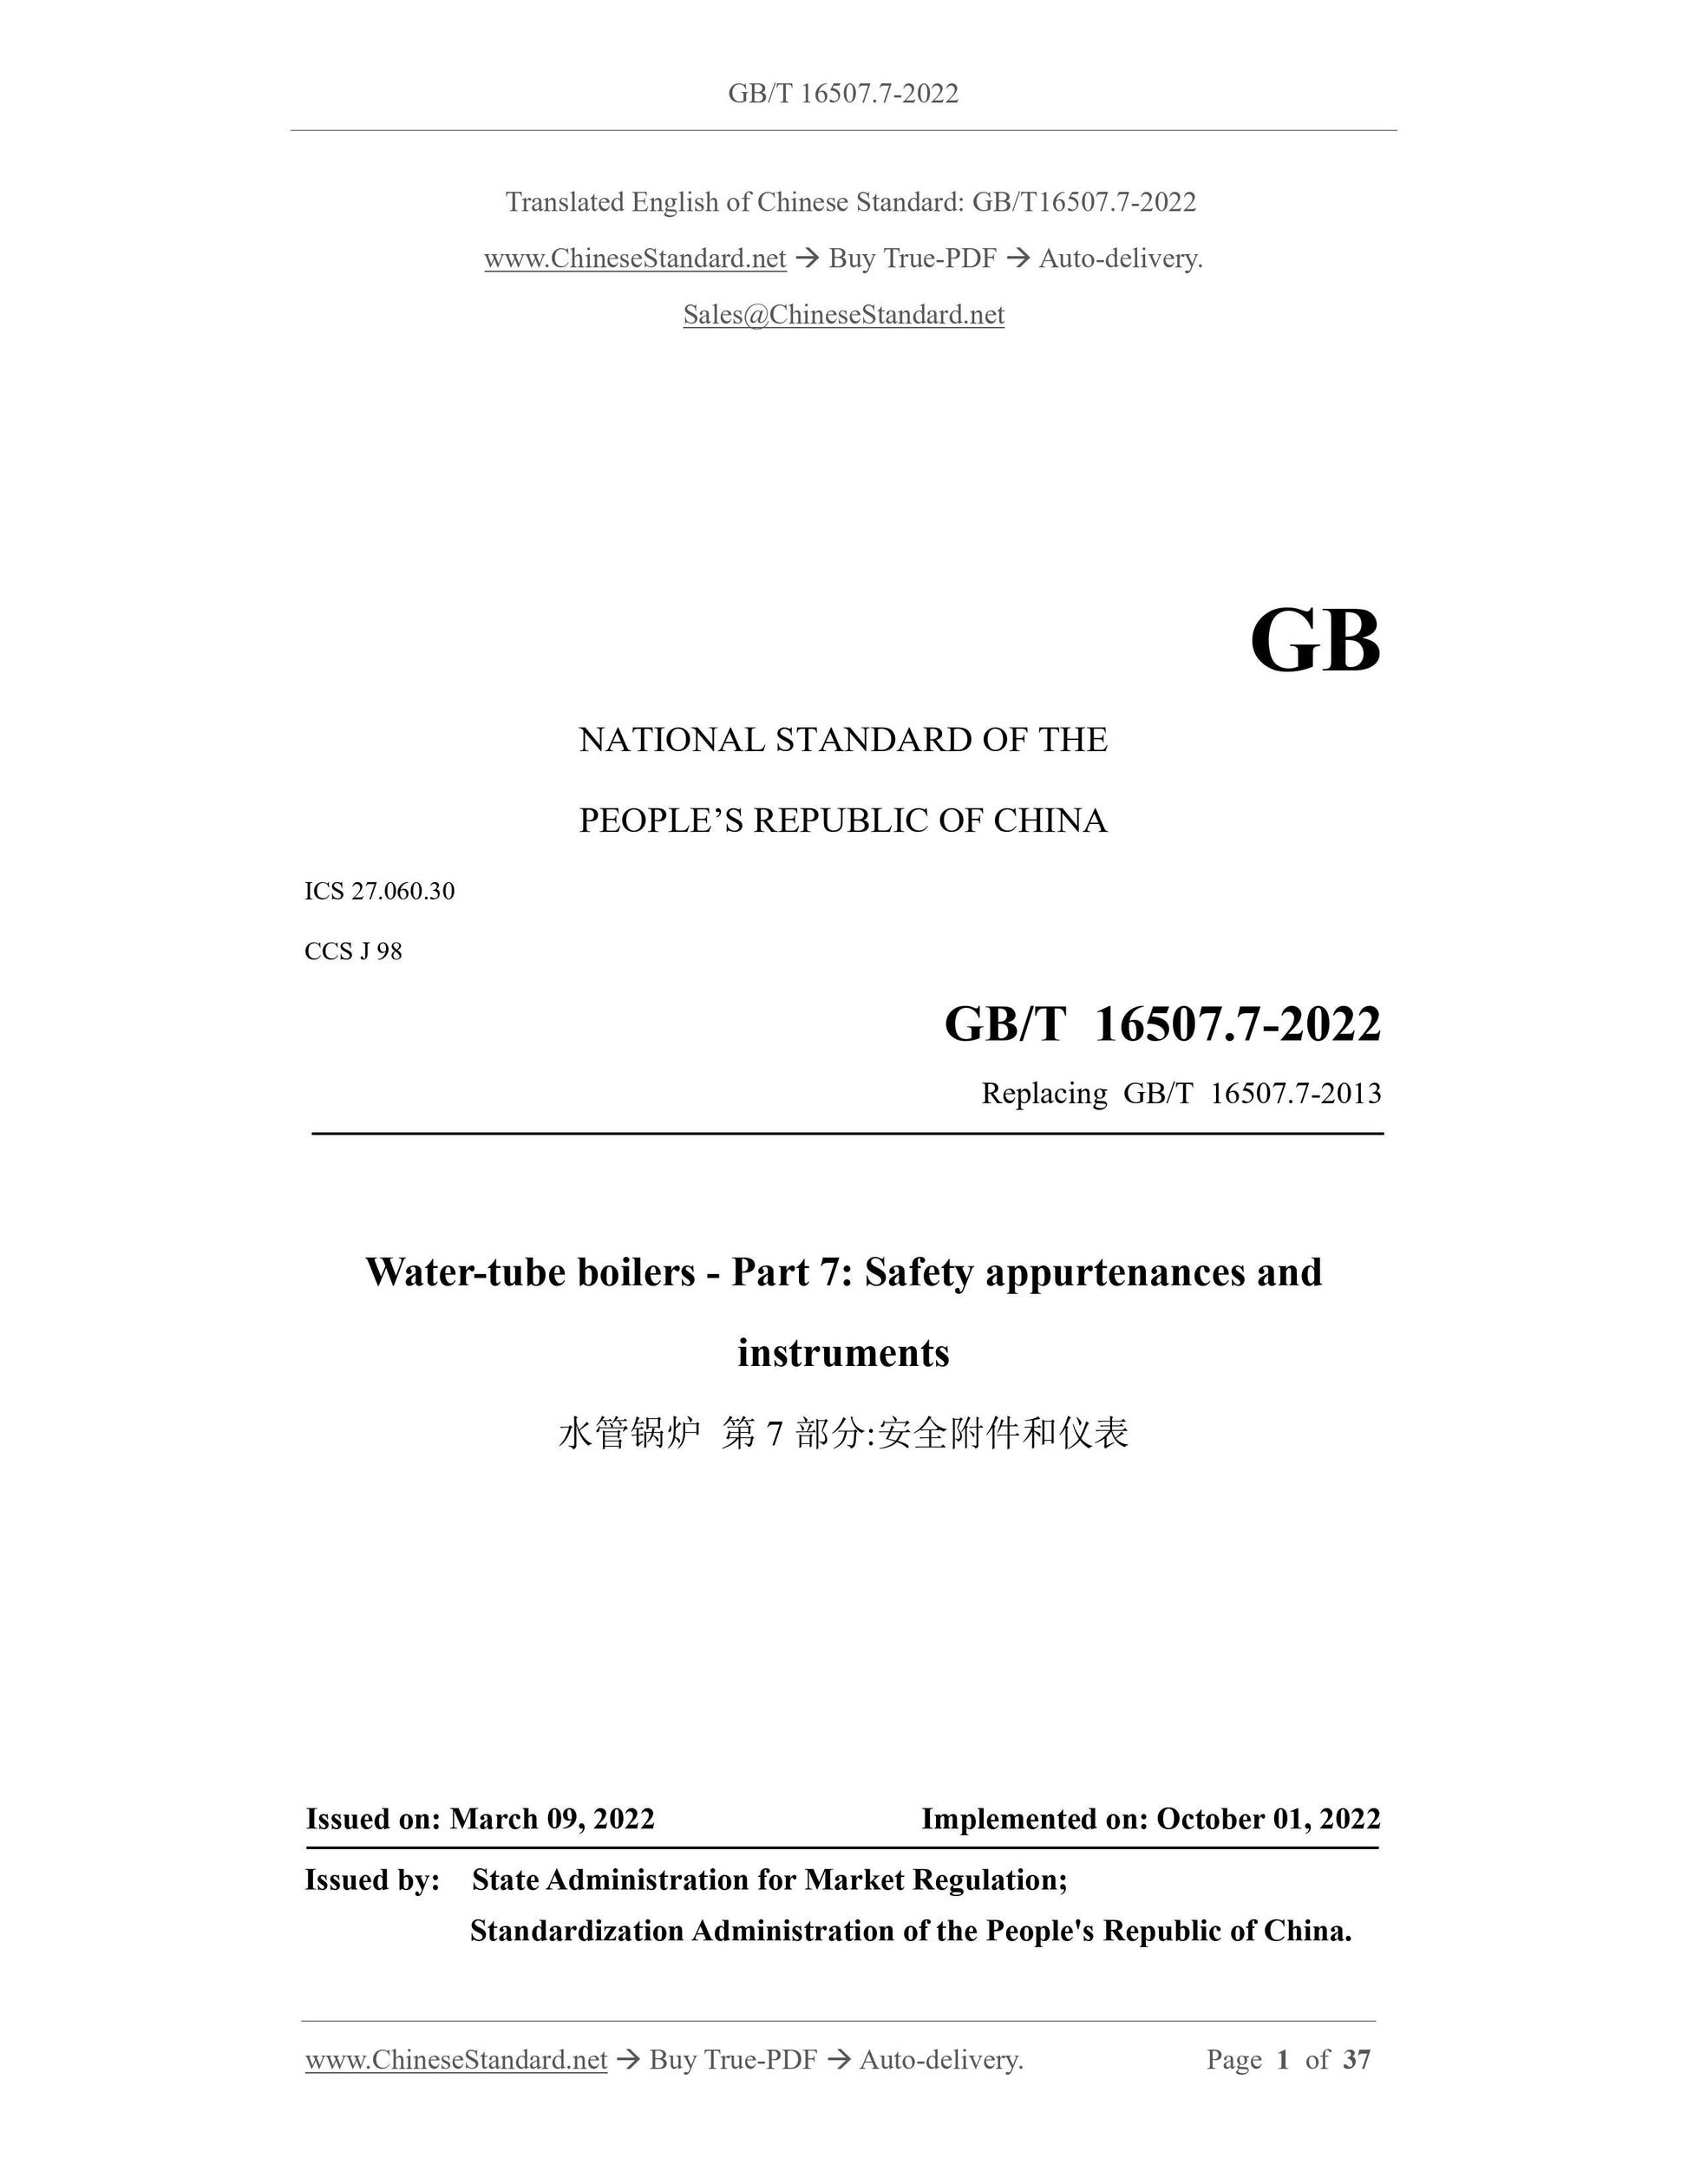 GB/T 16507.7-2022 Page 1